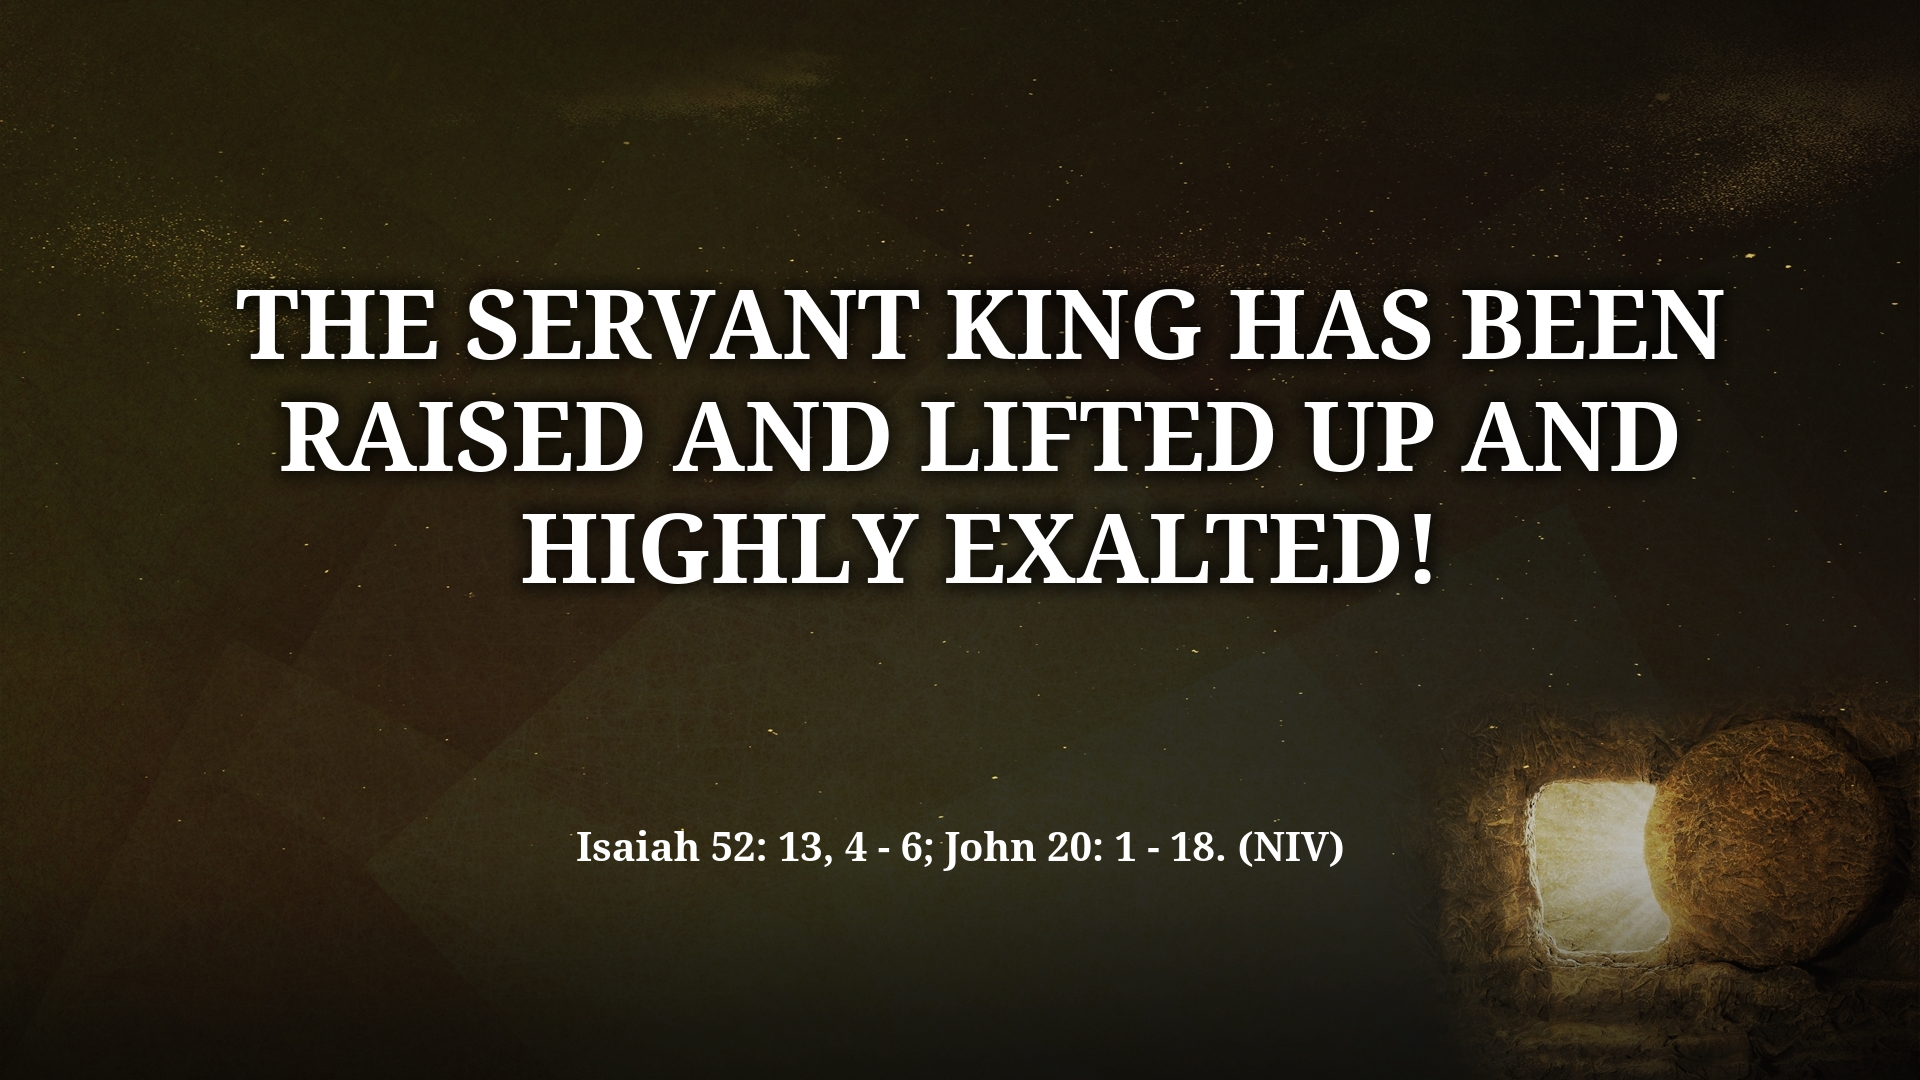 Apr 17, 2022 - The Servant King Has Been Raised and Lifted Up and Highly Exalted! (Video)